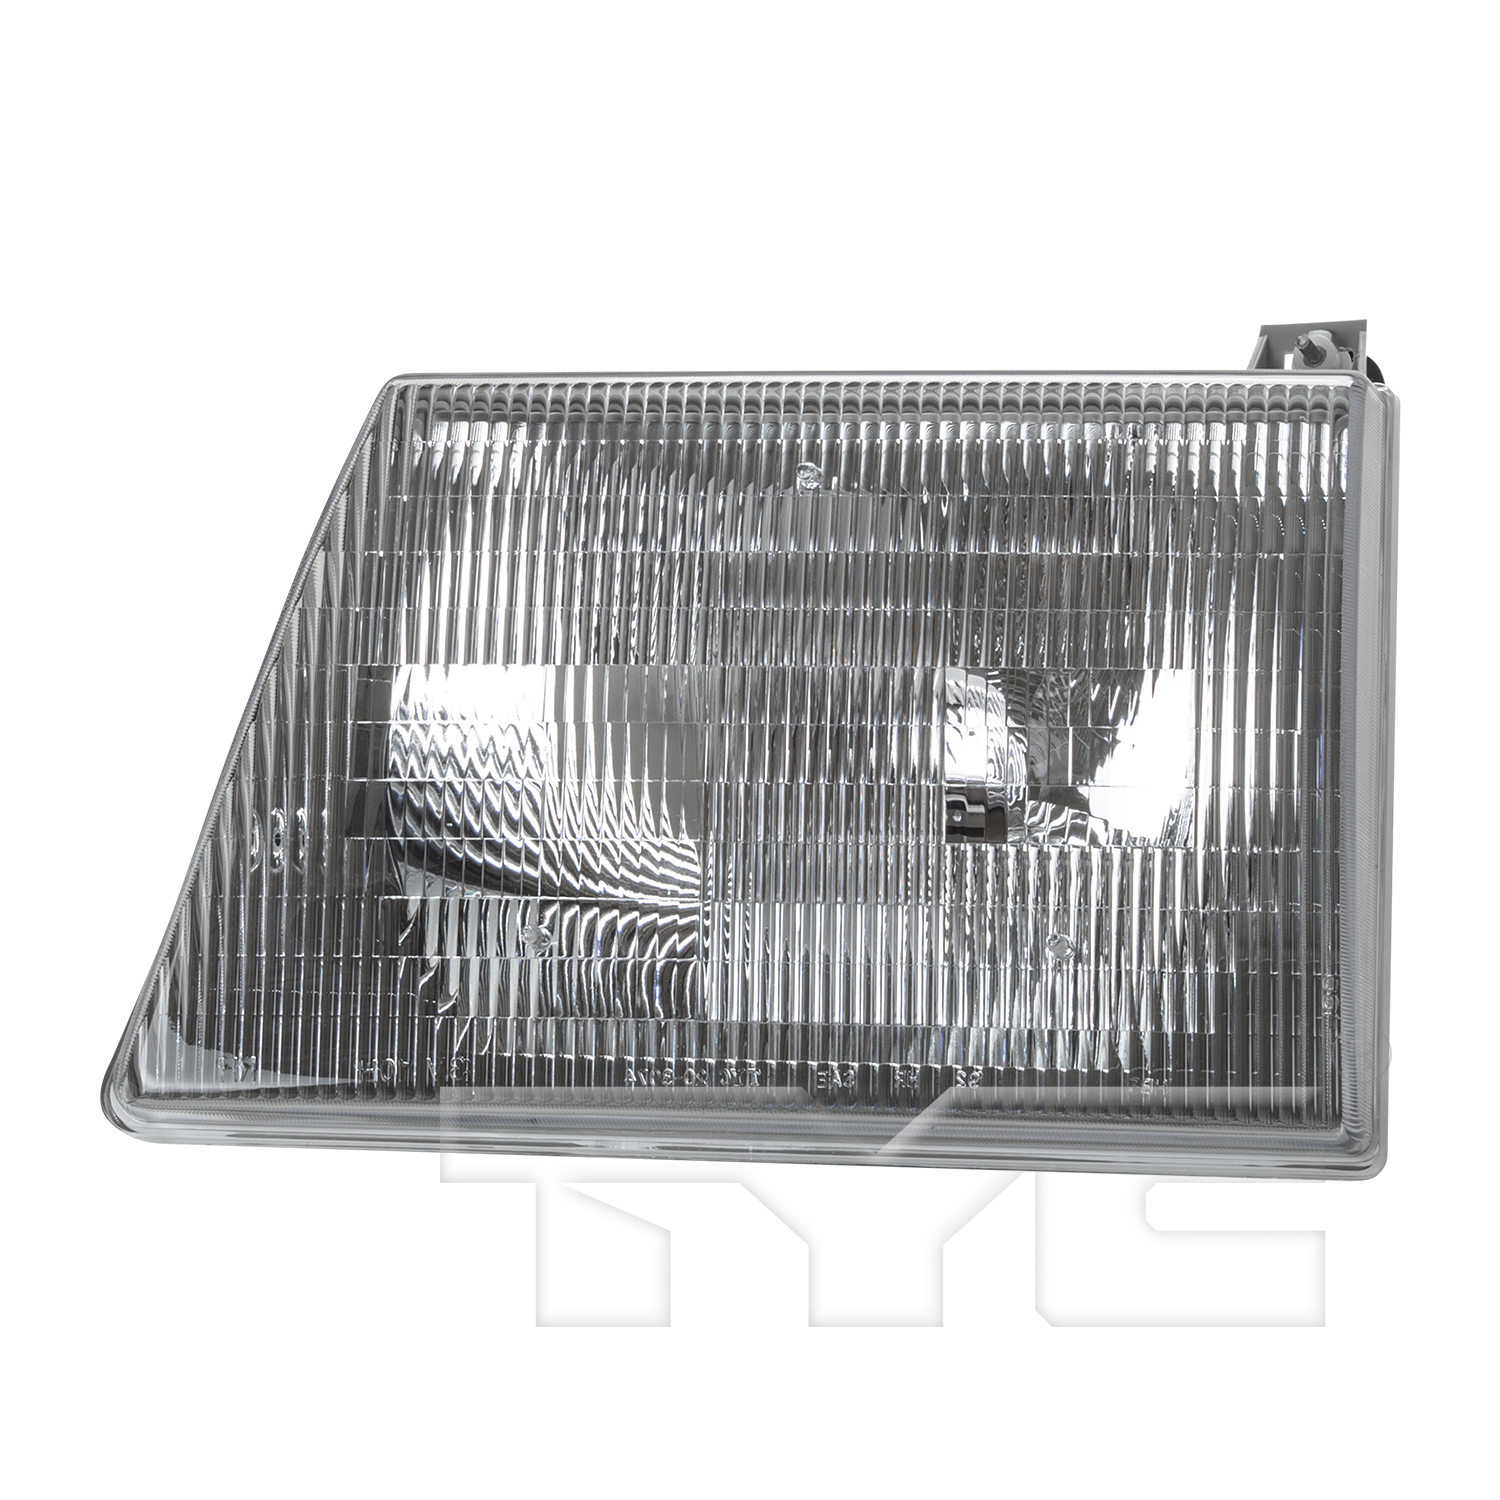 Aftermarket HEADLIGHTS for FORD - E-550 ECONOLINE SUPER DUTY, E-550 ECONOLINE SUPER DUTY,02-02,LT Headlamp assy composite